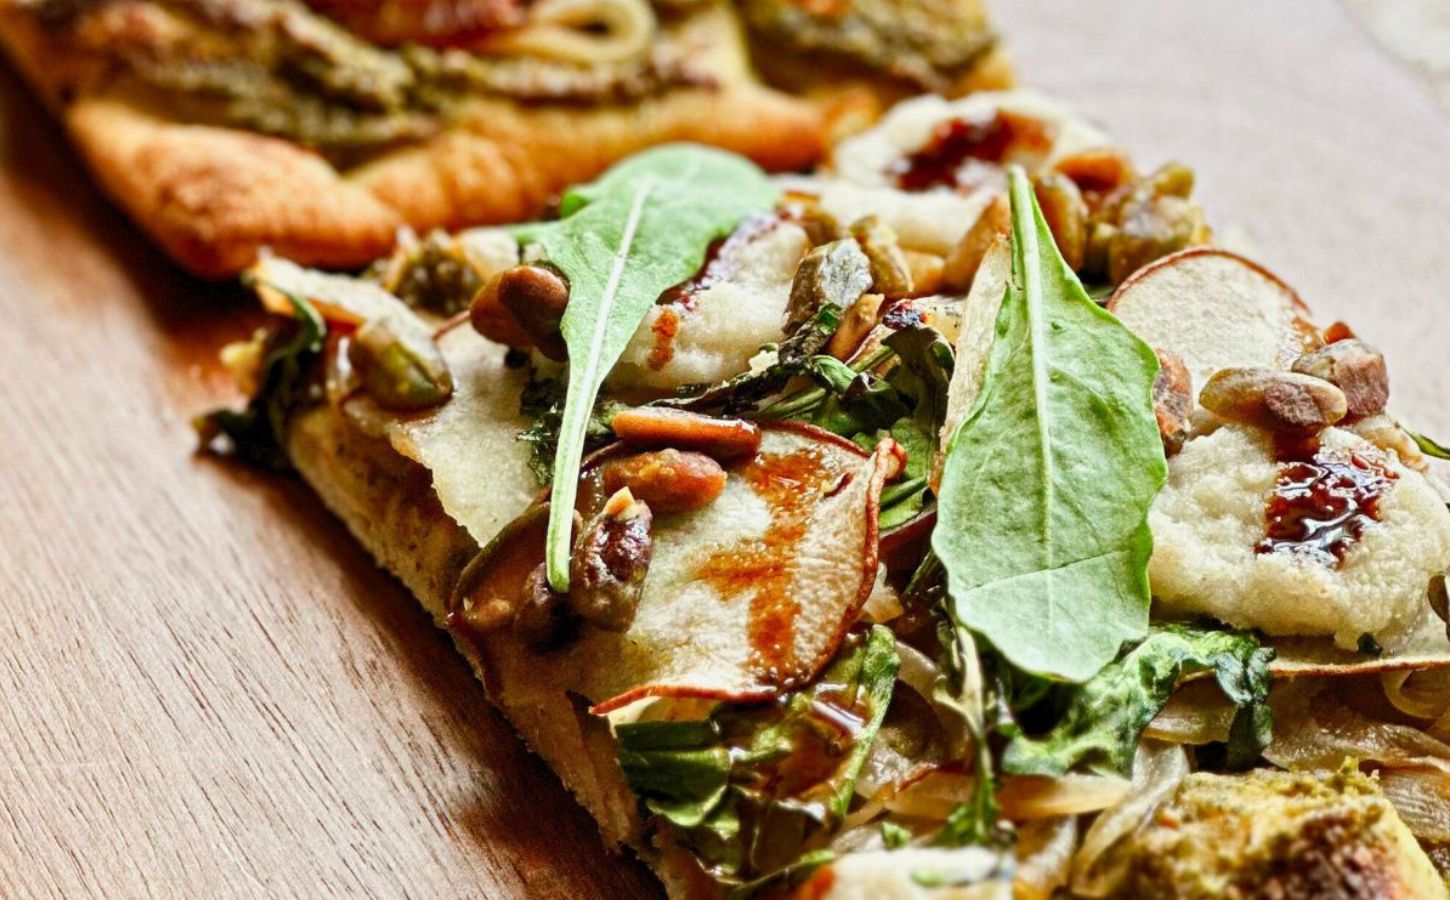 A vegan pistachio and pear pizza made to a plant-based recipe